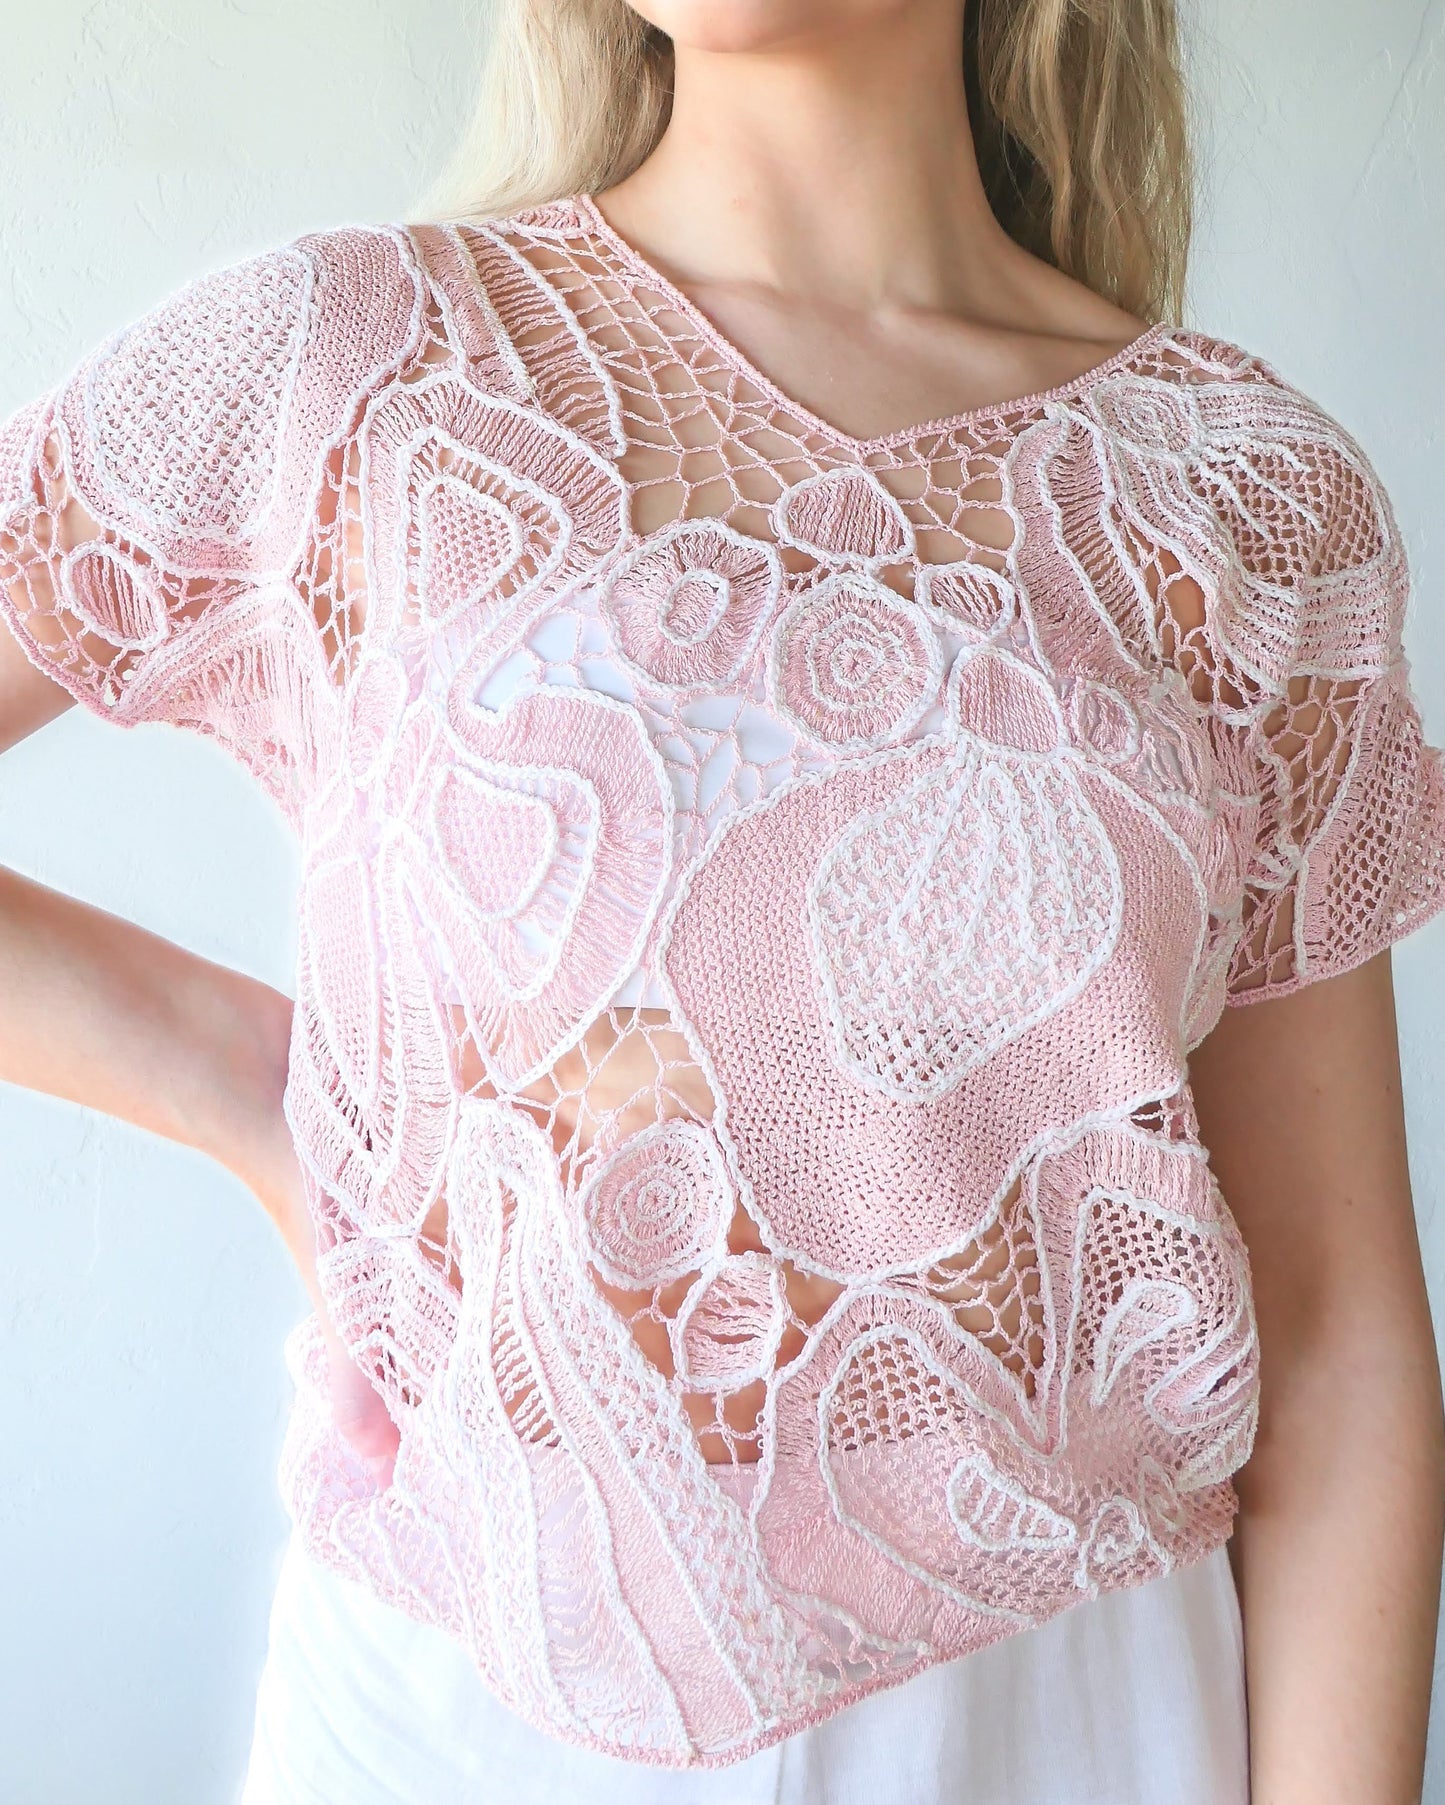 Closeup front view of girl wearing a crochet top with abstract flora design in colors of cotton candy pink and white. Lim's Vintage original crochet top from the 1980s.